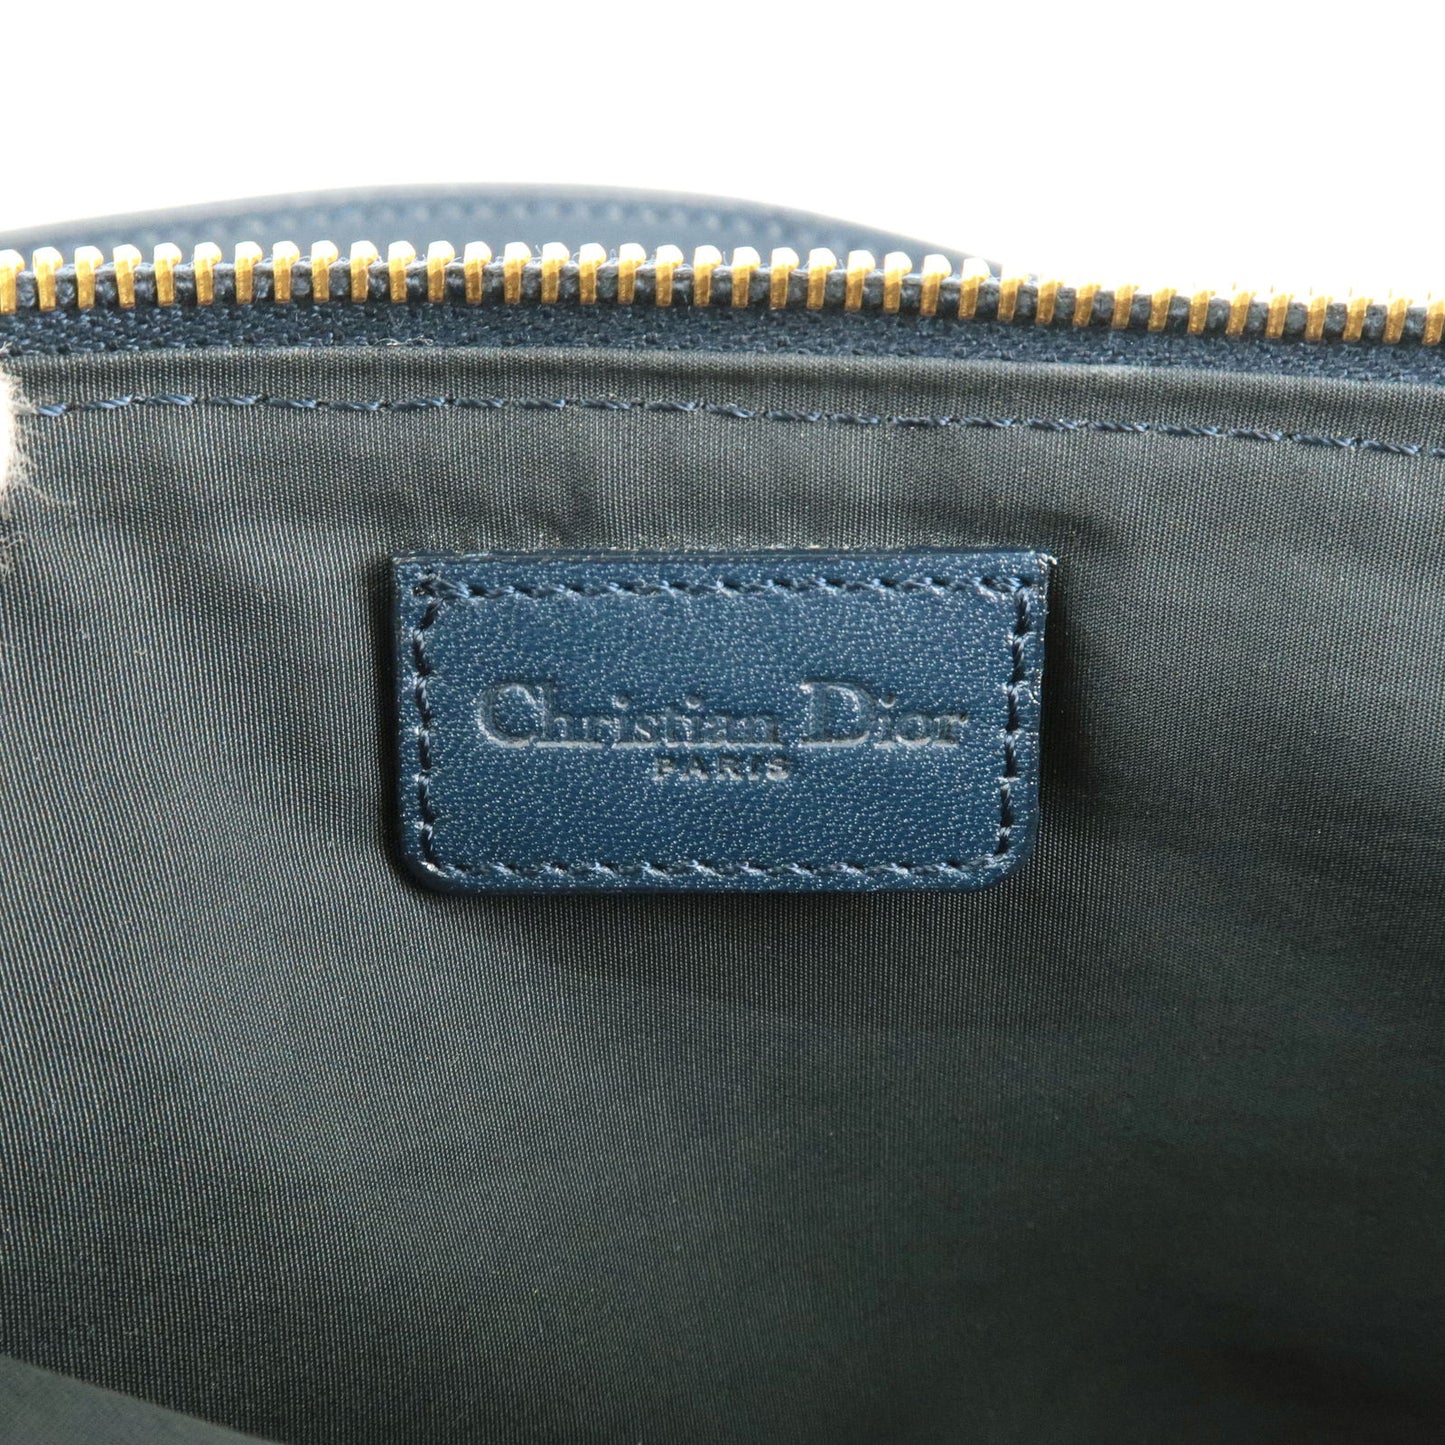 Christian Dior Trotter Canvas Leather Saddle Bag Pouch Navy